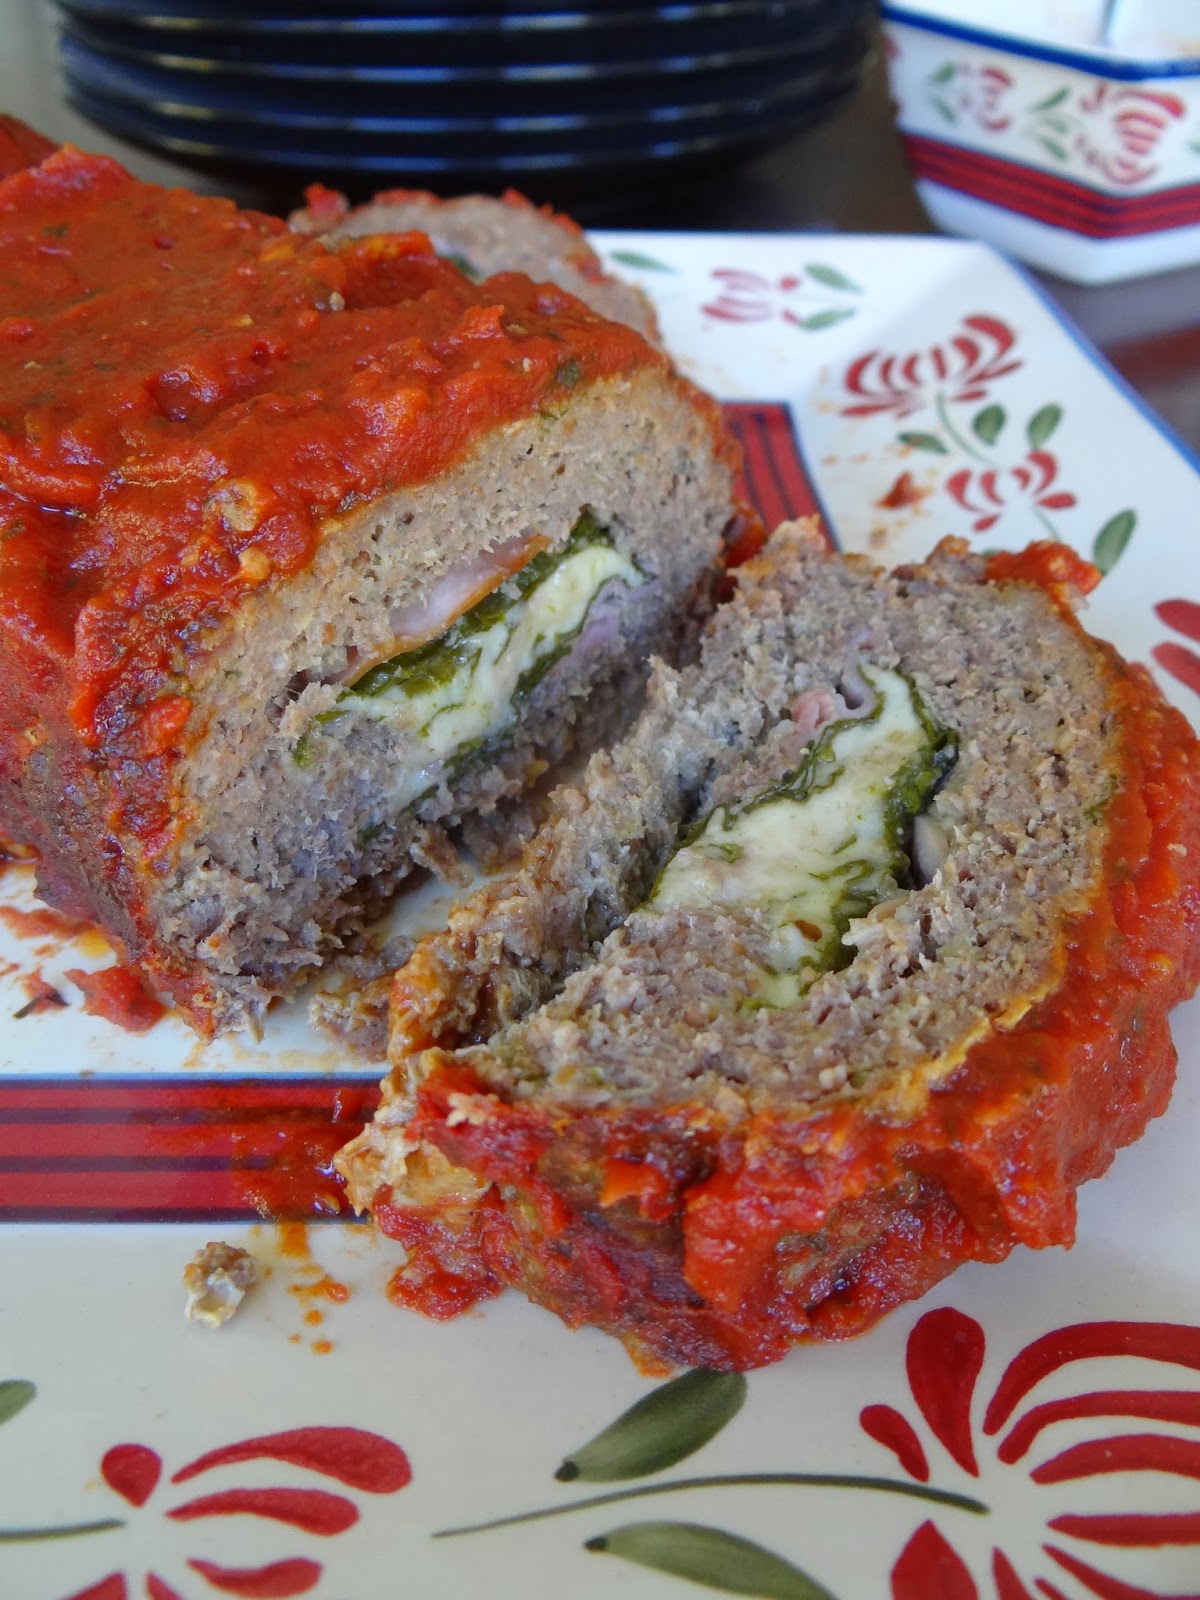 Simple home cook: Rolled meatloaf with ham, cheese & spinach